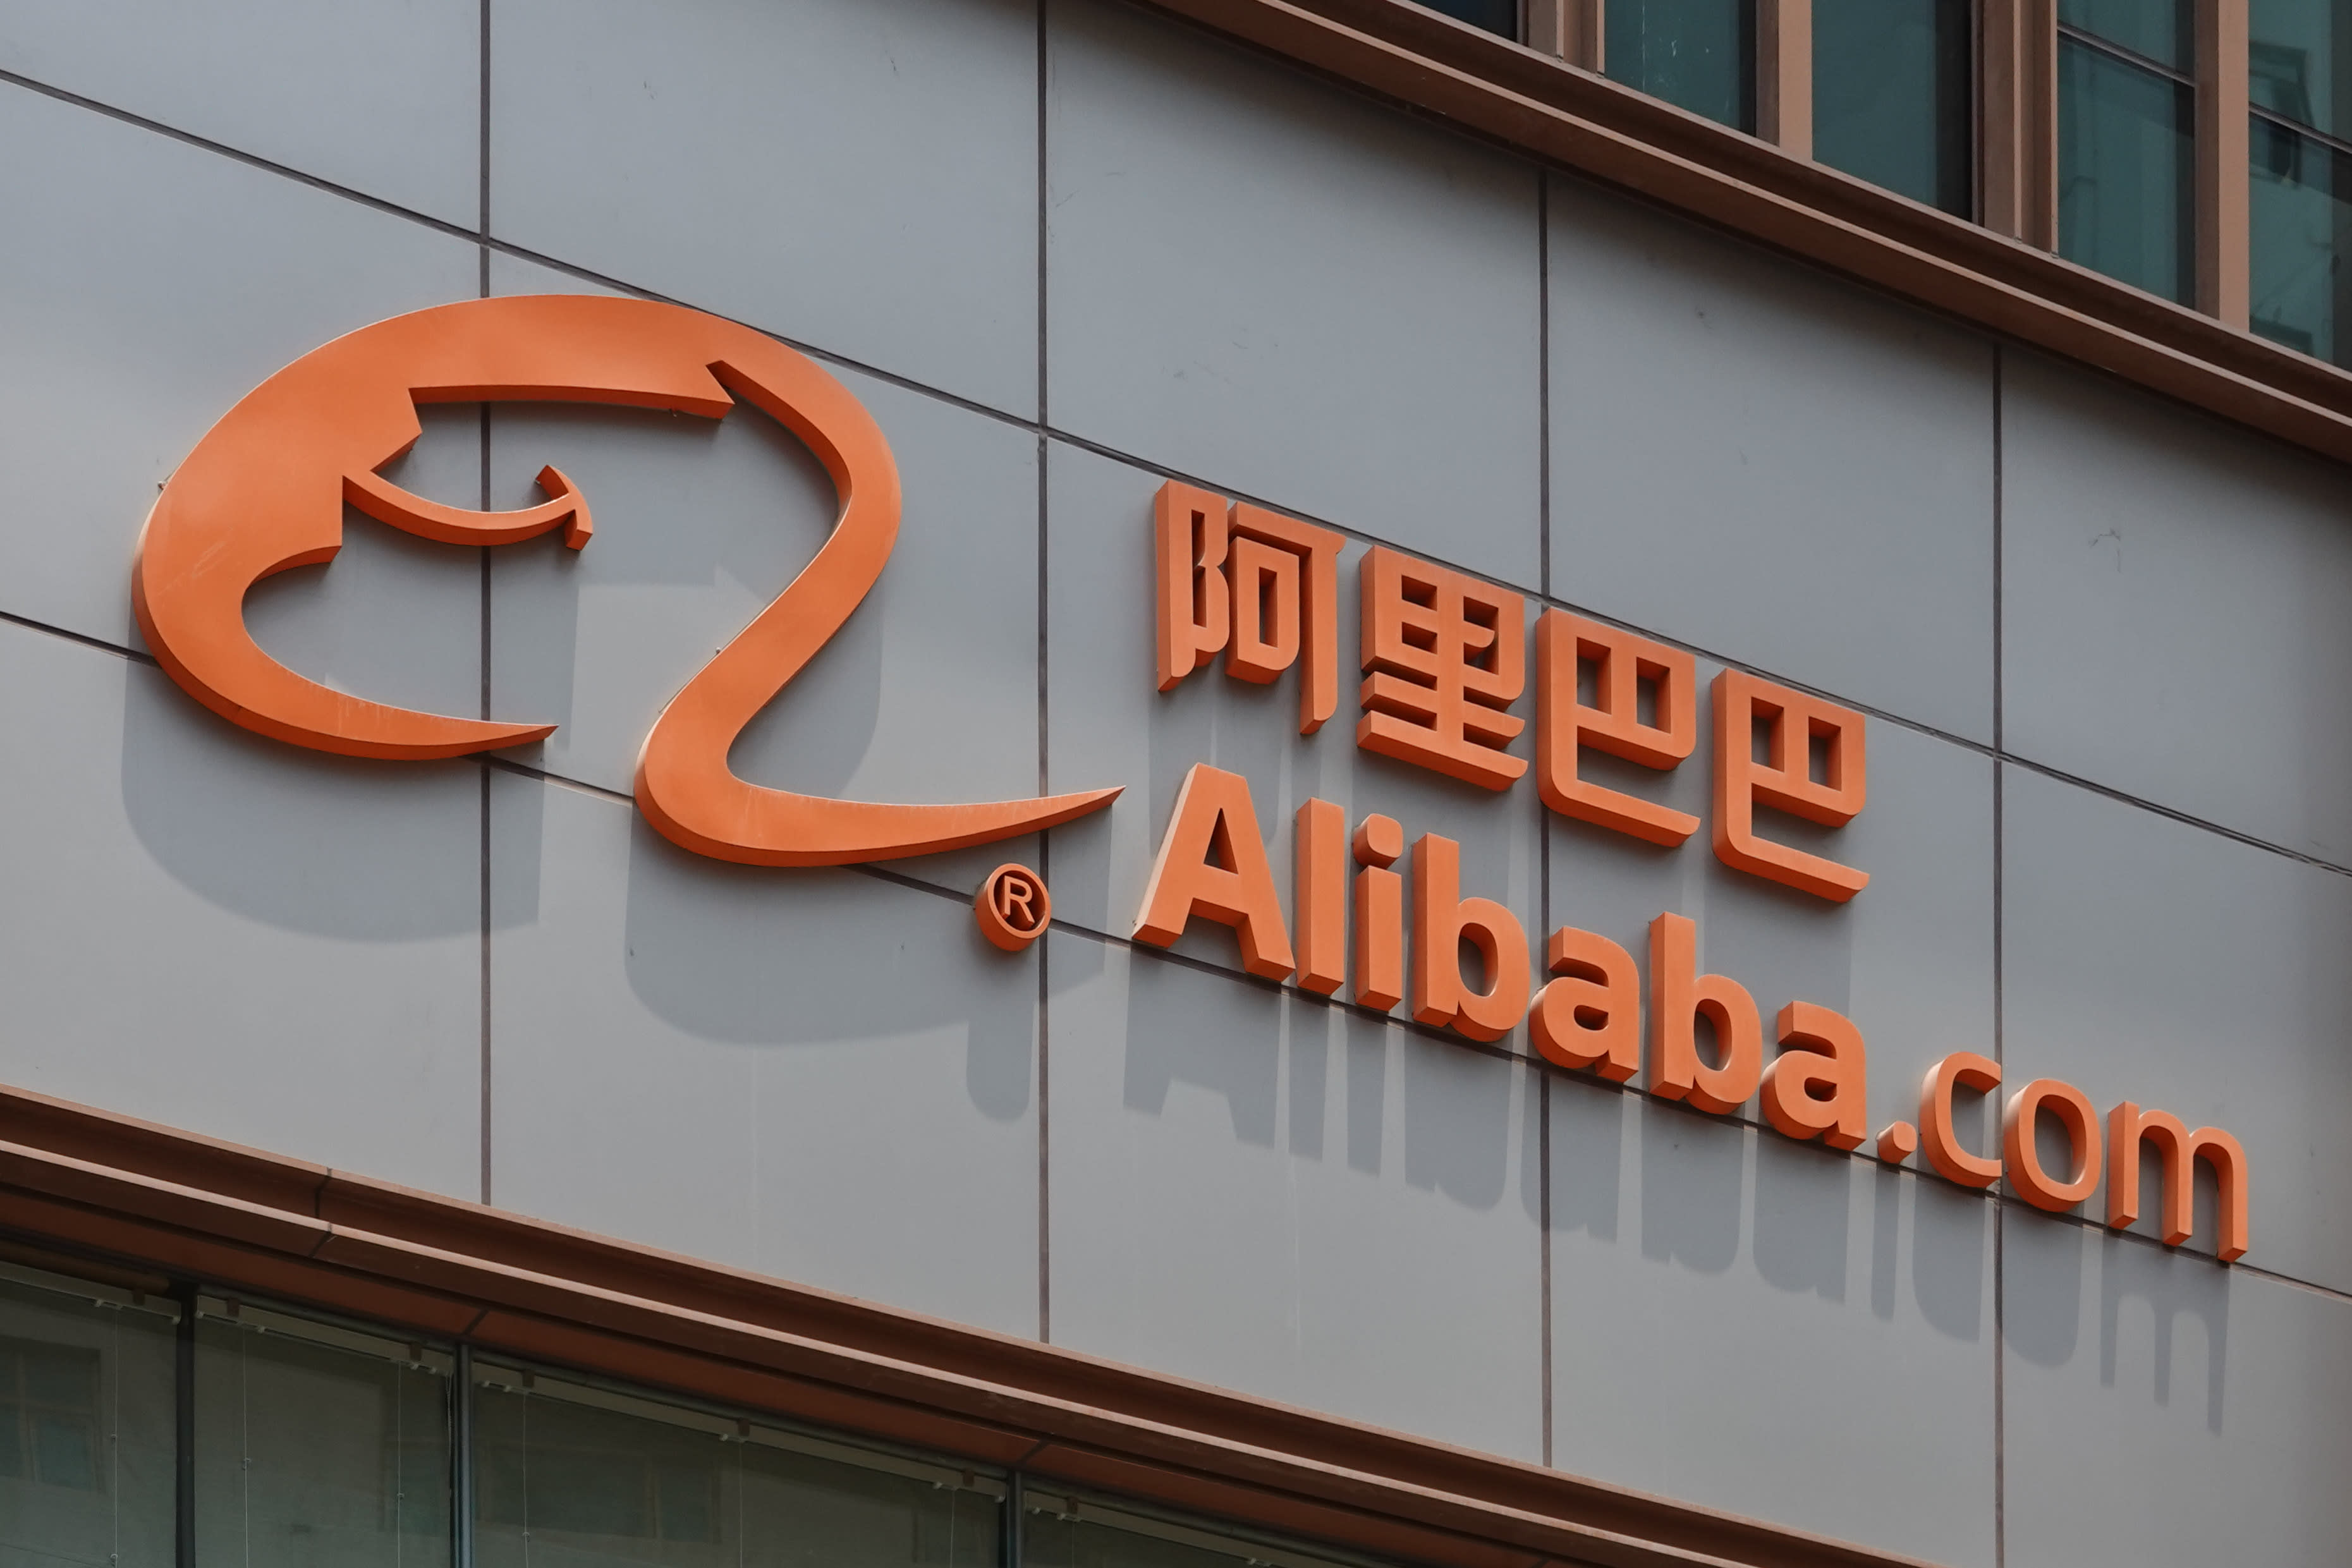 Alibaba says Eddie Wu will succeed Daniel Chang as CEO in a surprise move